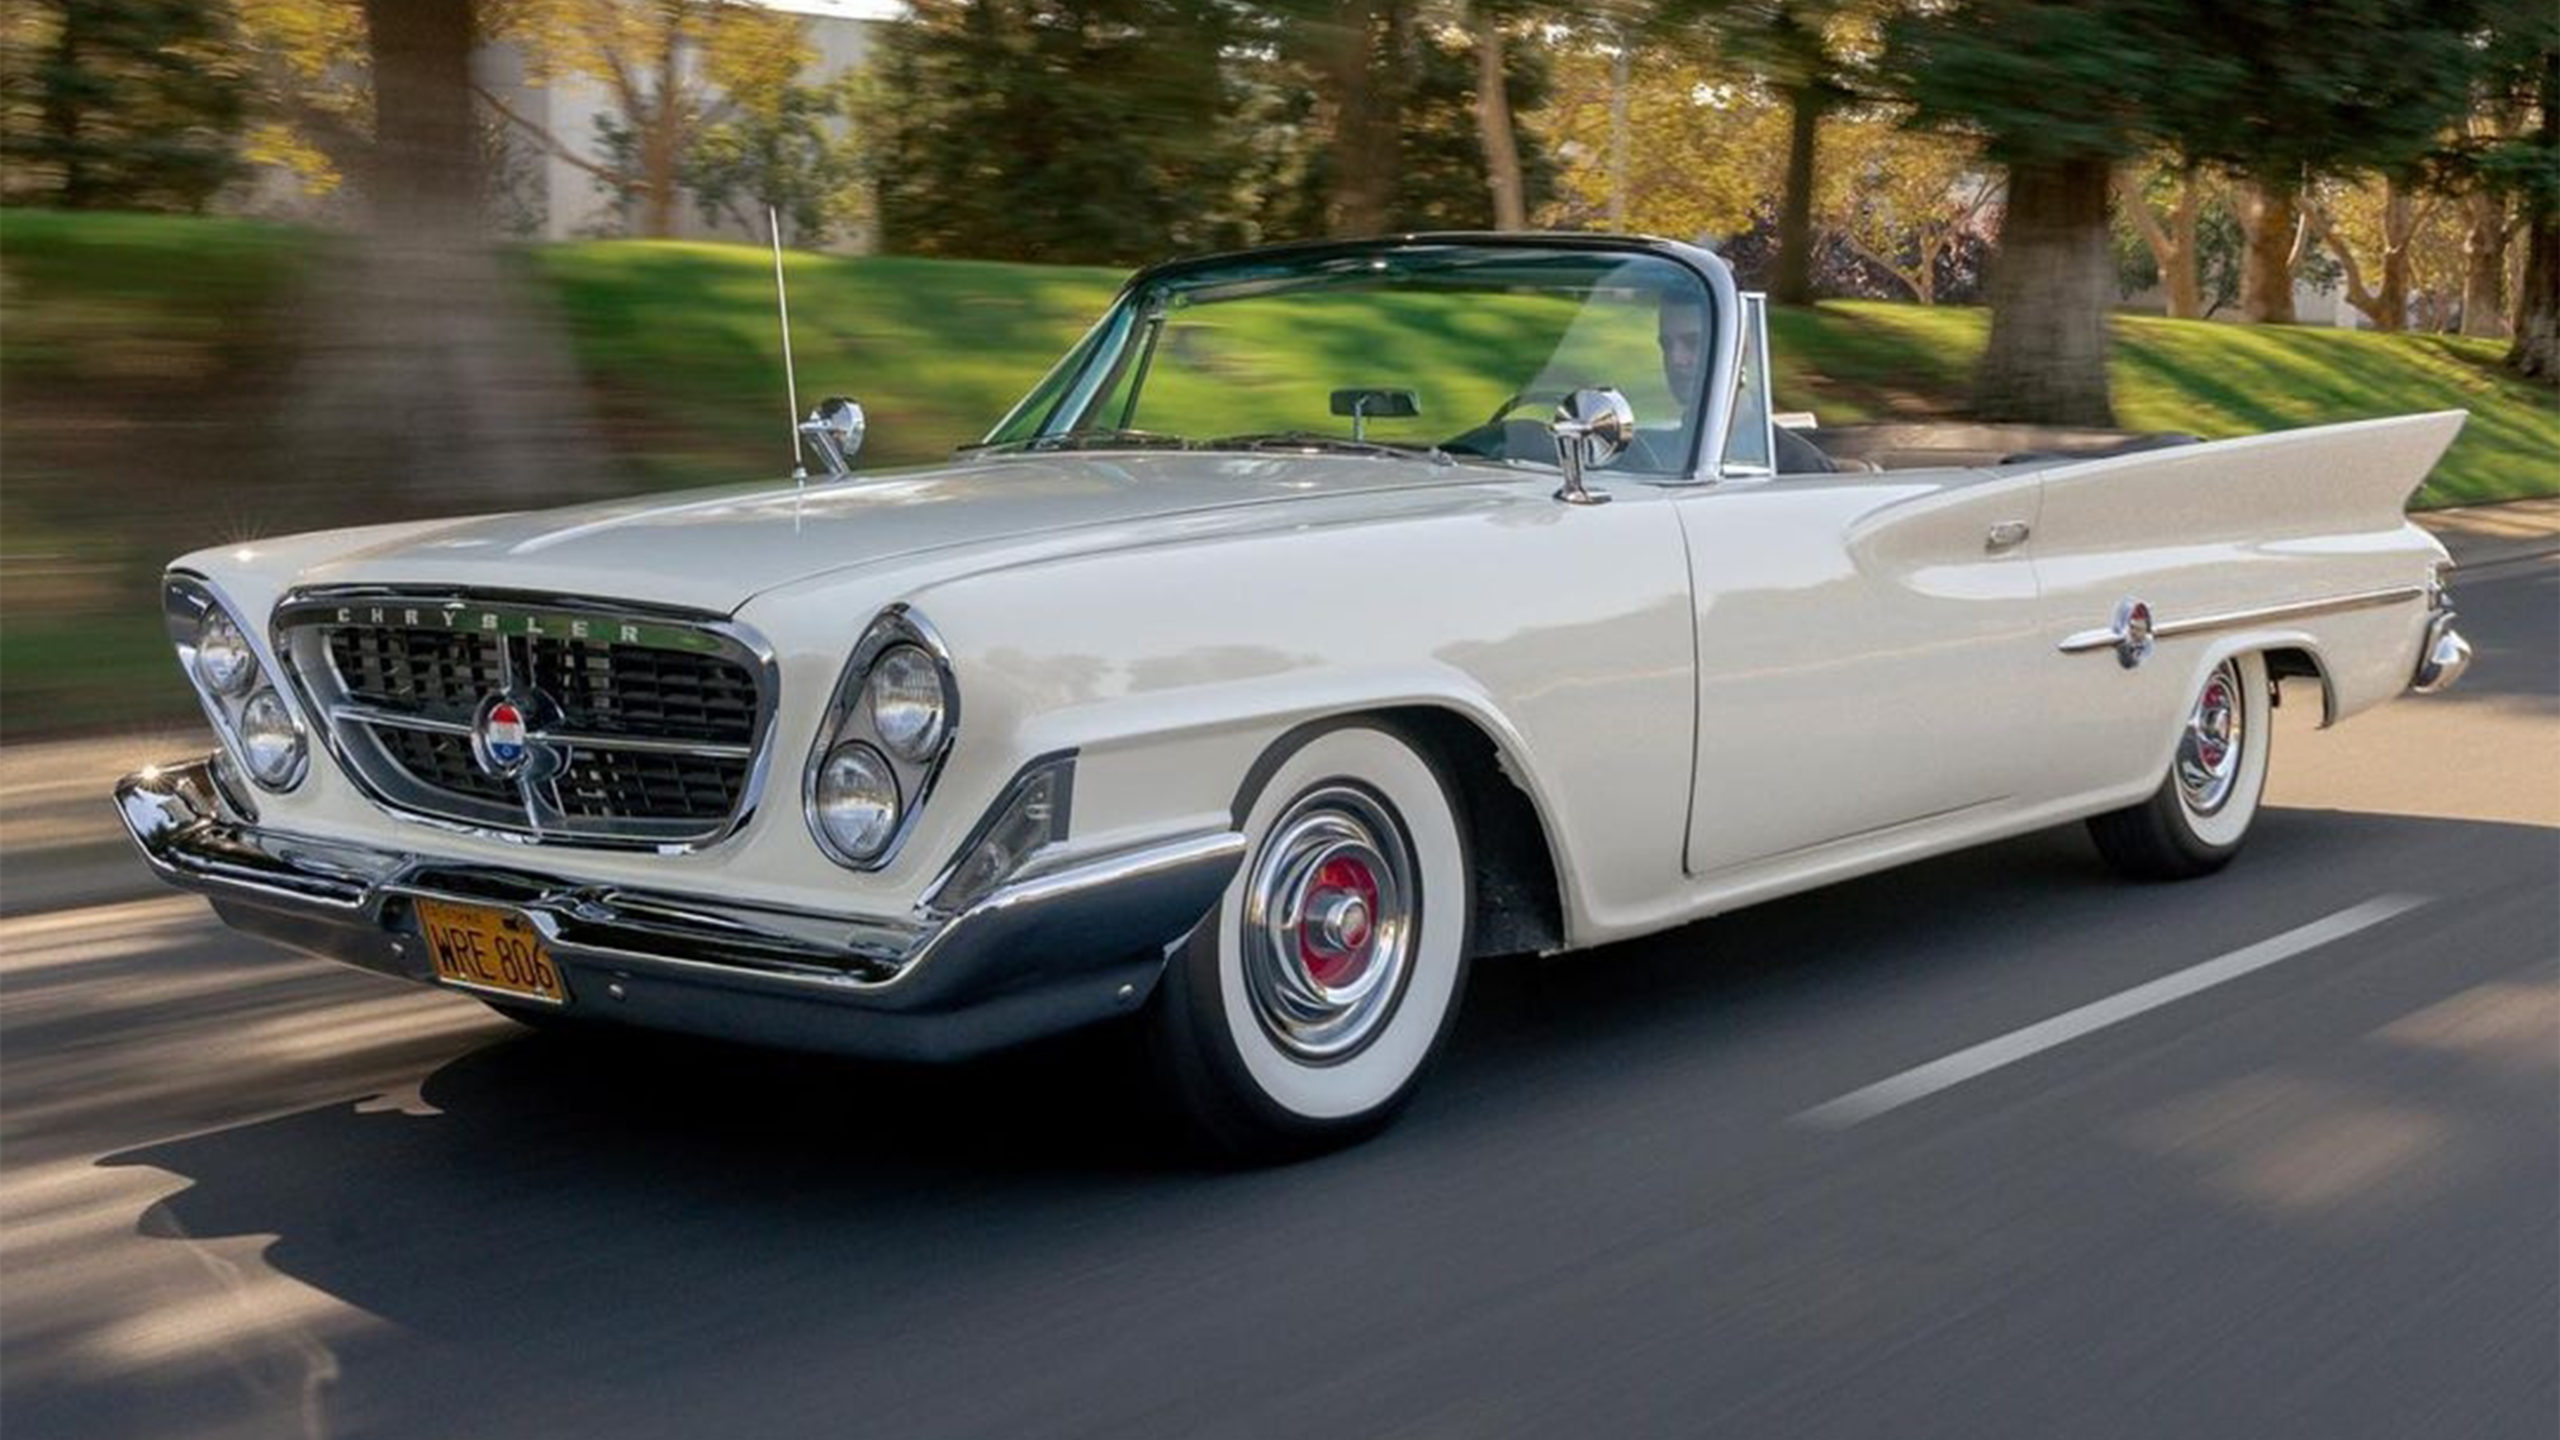 The 1961 Chrysler 300G Convertible: A High-Performance Luxury Convertible